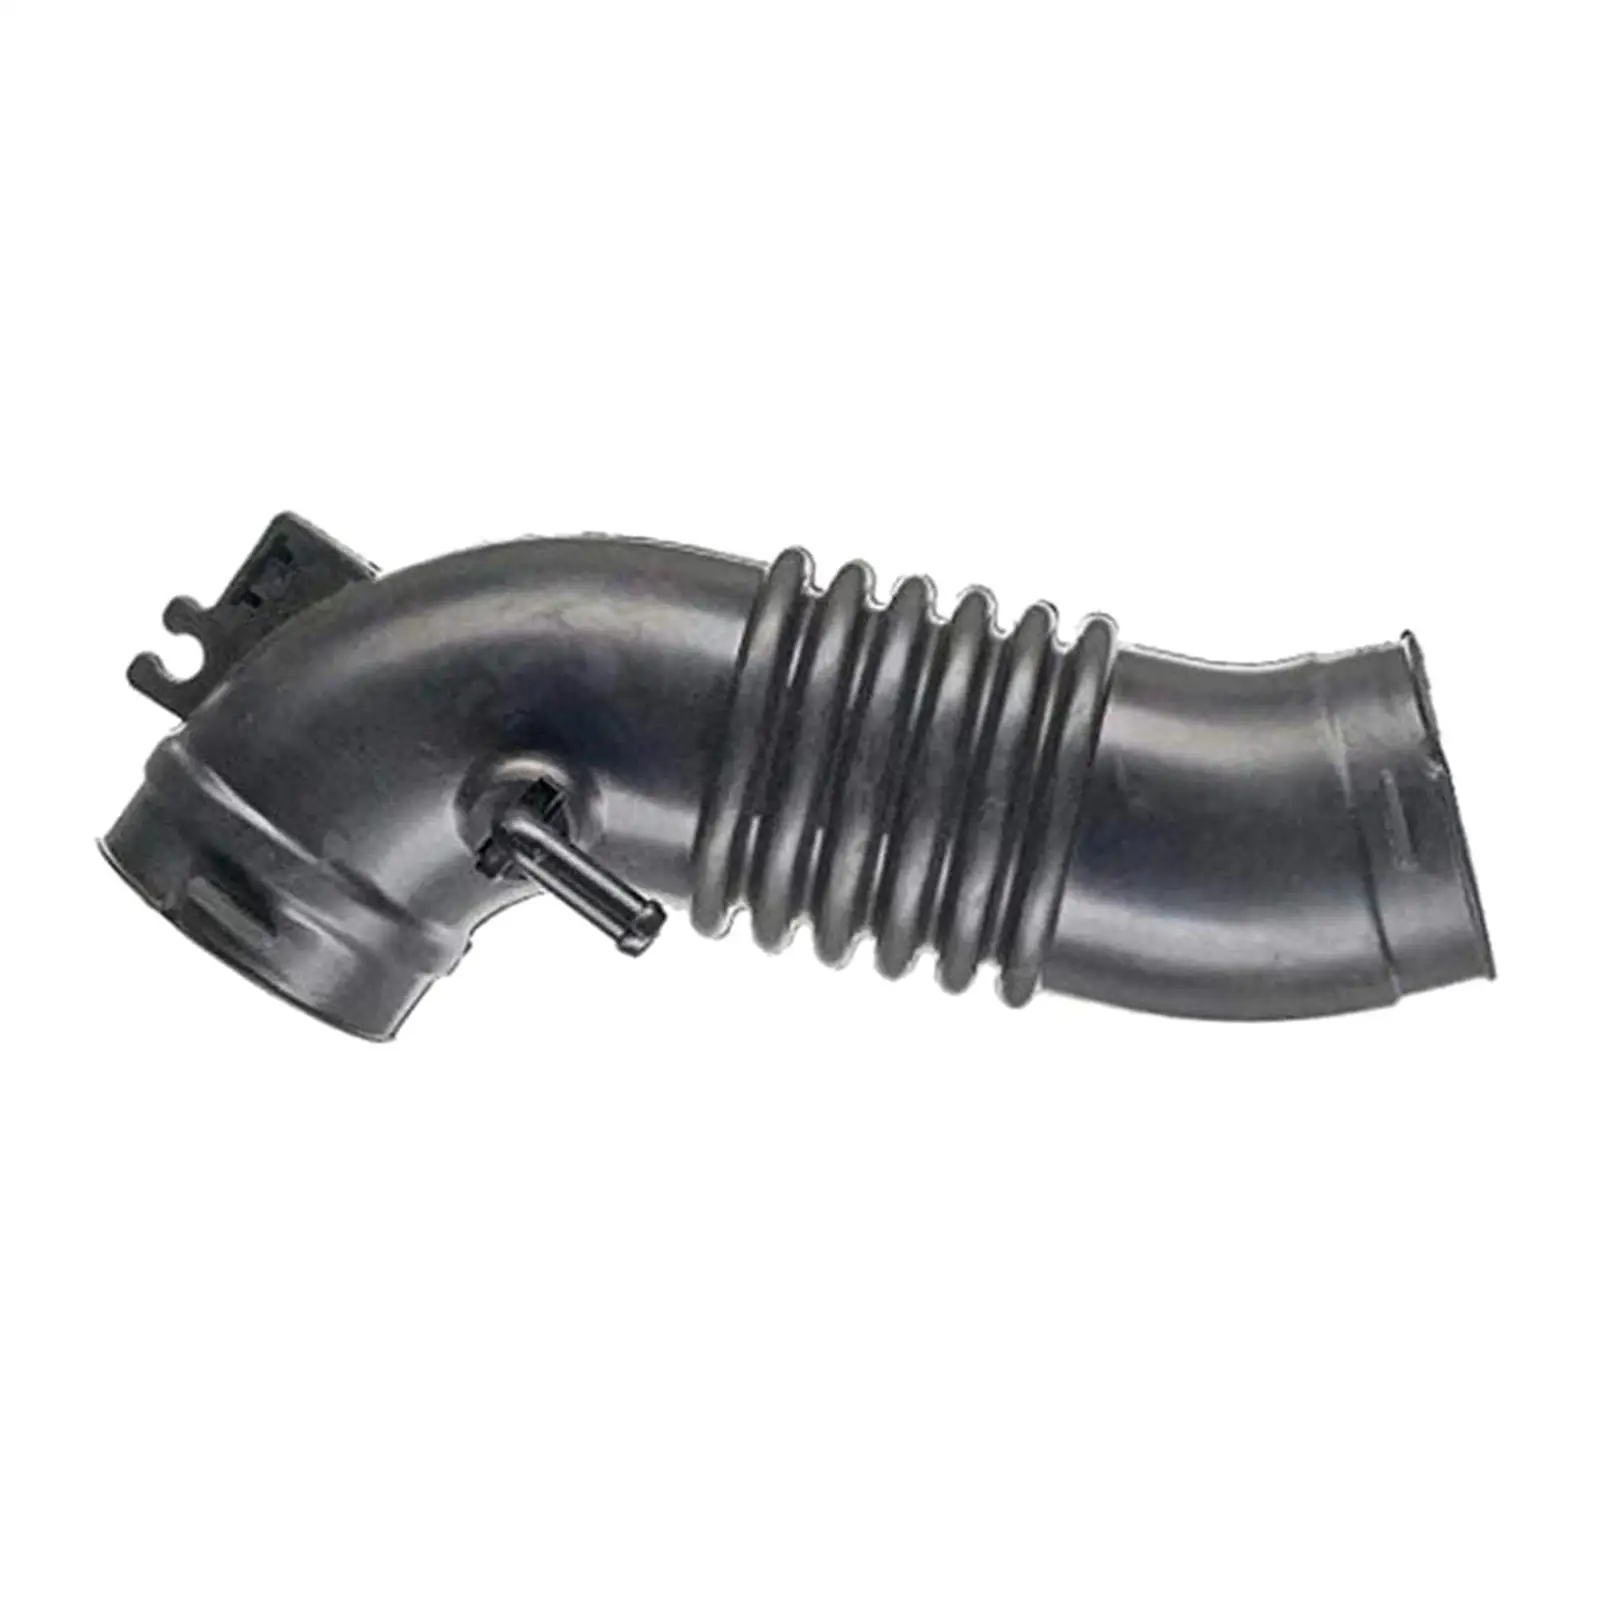 Air Intake Boot Hose Tube, Convenient Rugged And Durable Air Intake Boot, for